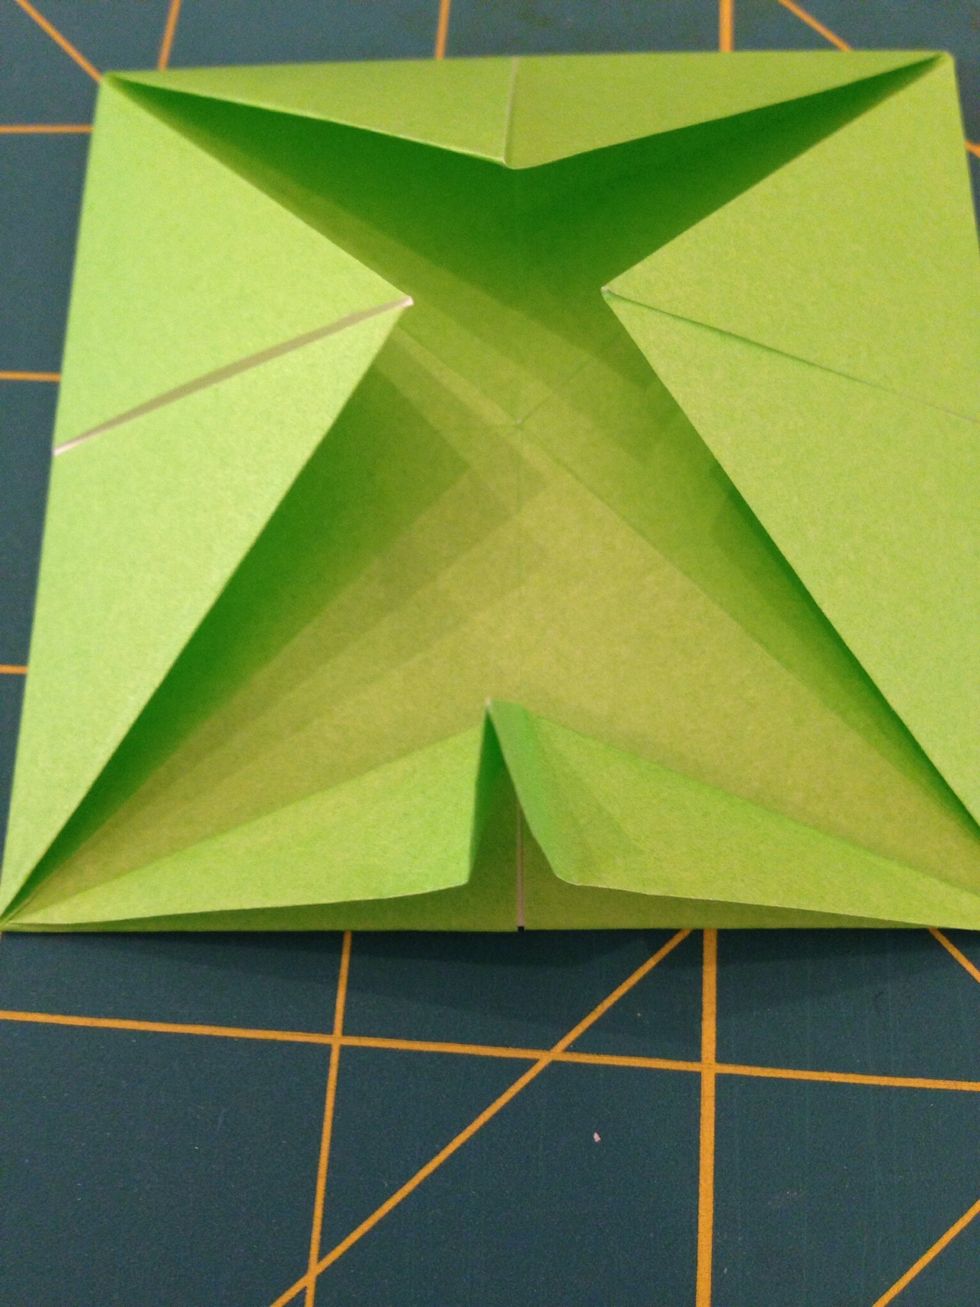 How to make an origami ornament for christmas - B+C Guides